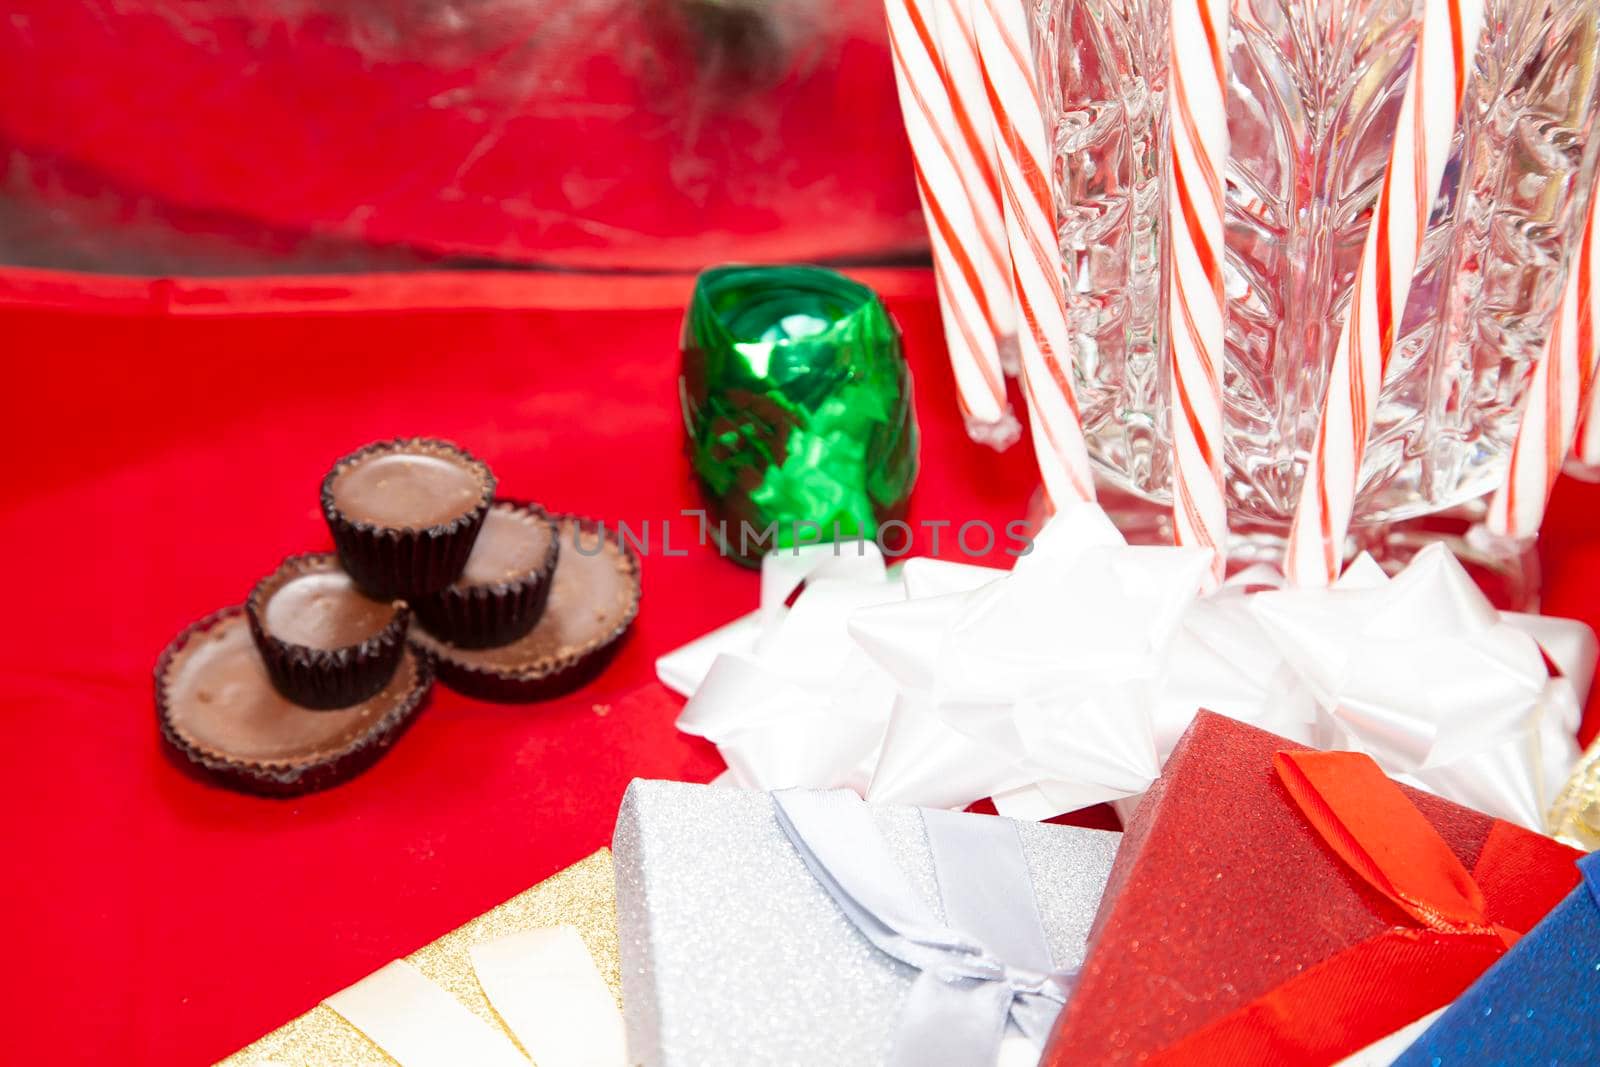 Candy canes on a glass vase with chocolates, green ribbon paper and gold, silver, and red presents on a red tabletop